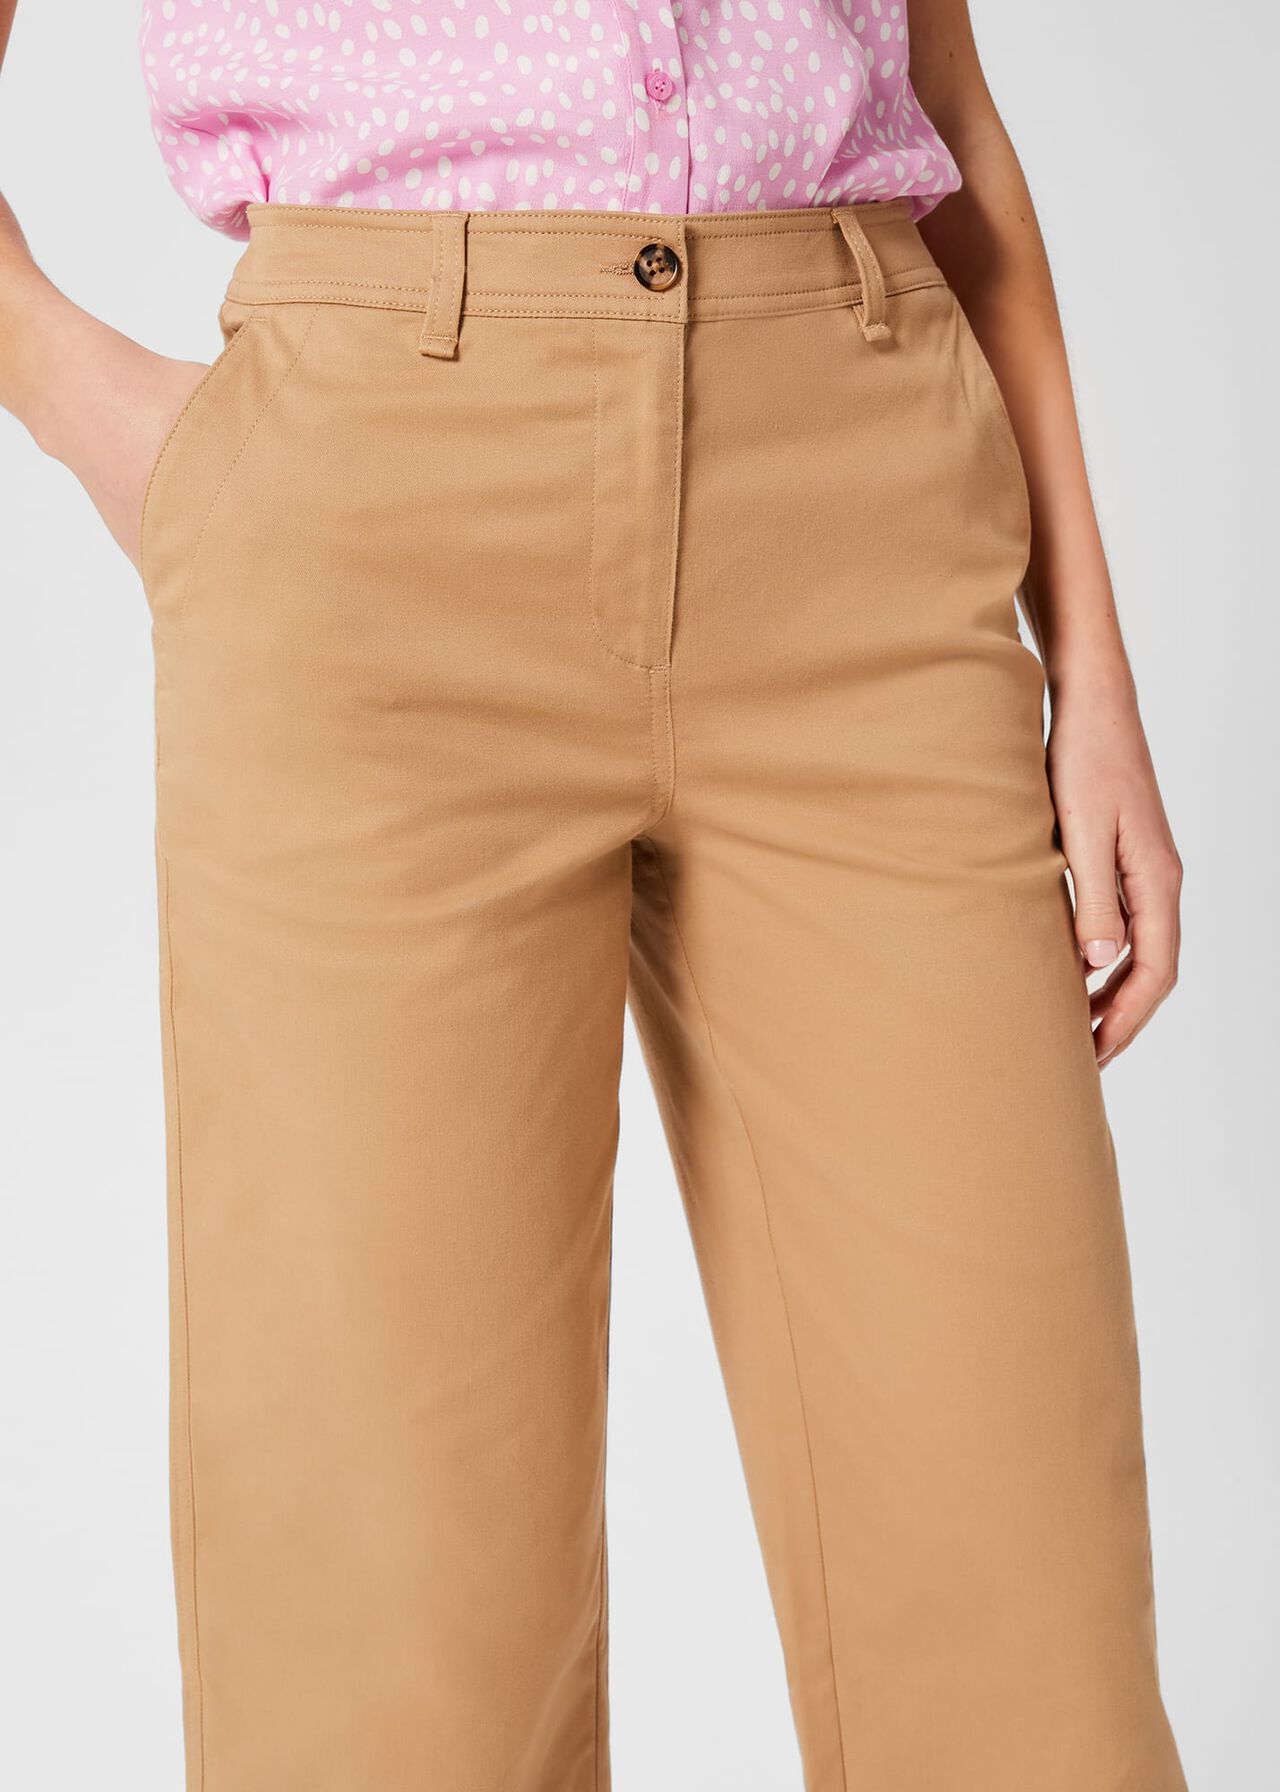 Marnie Trousers, Sand, hi-res